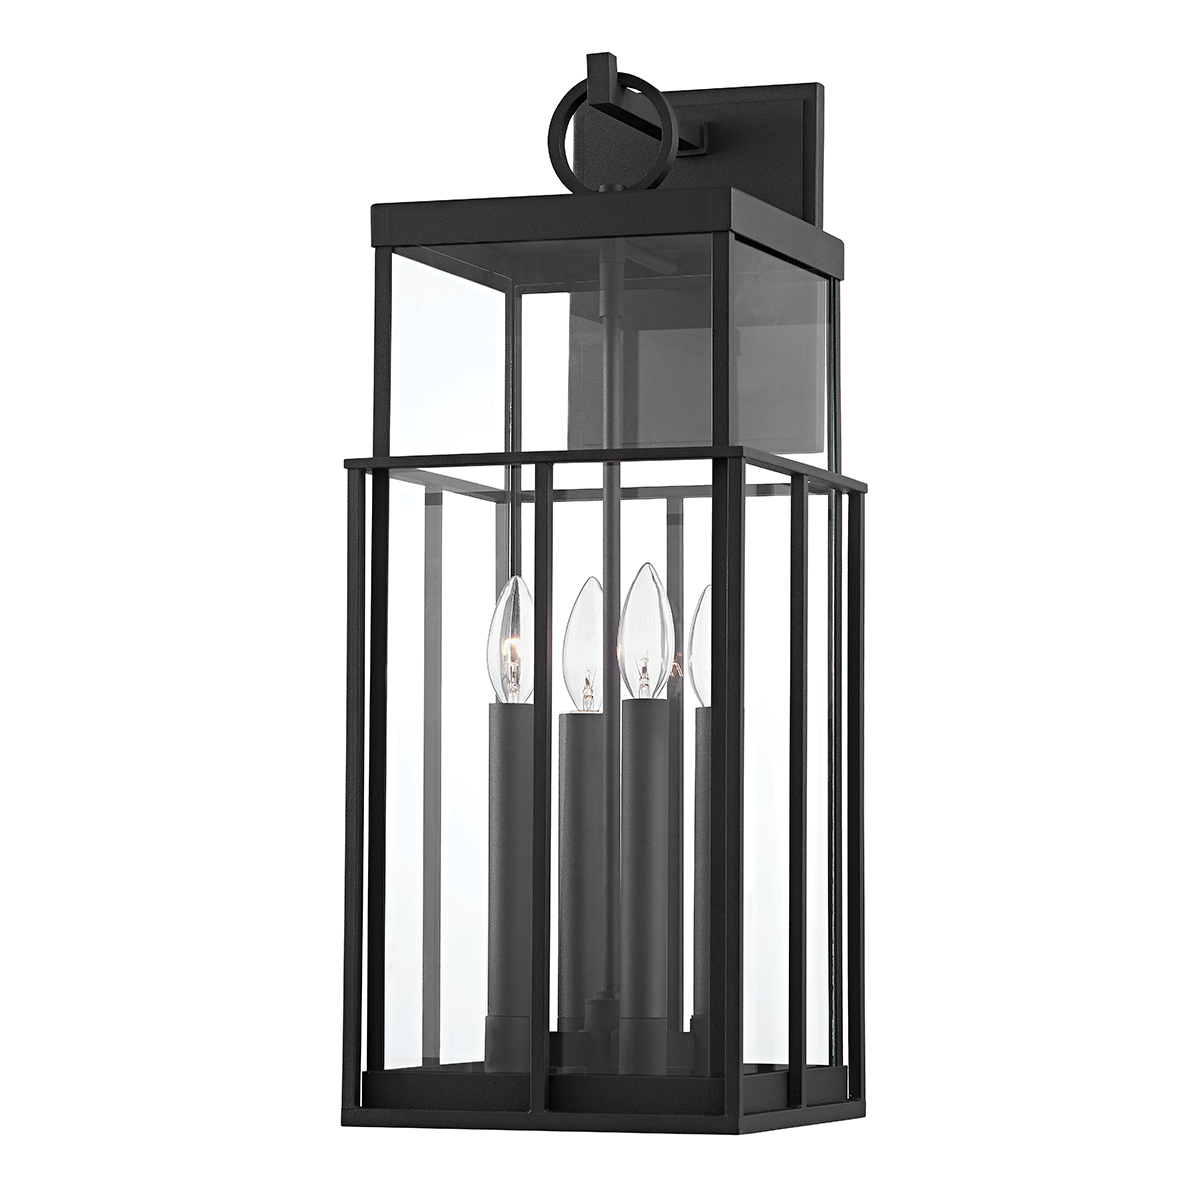 Troy LONGPORT 4 LIGHT EXTERIOR WALL SCONCE B6483 Outdoor l Wall Troy Lighting TEXTURE BLACK  